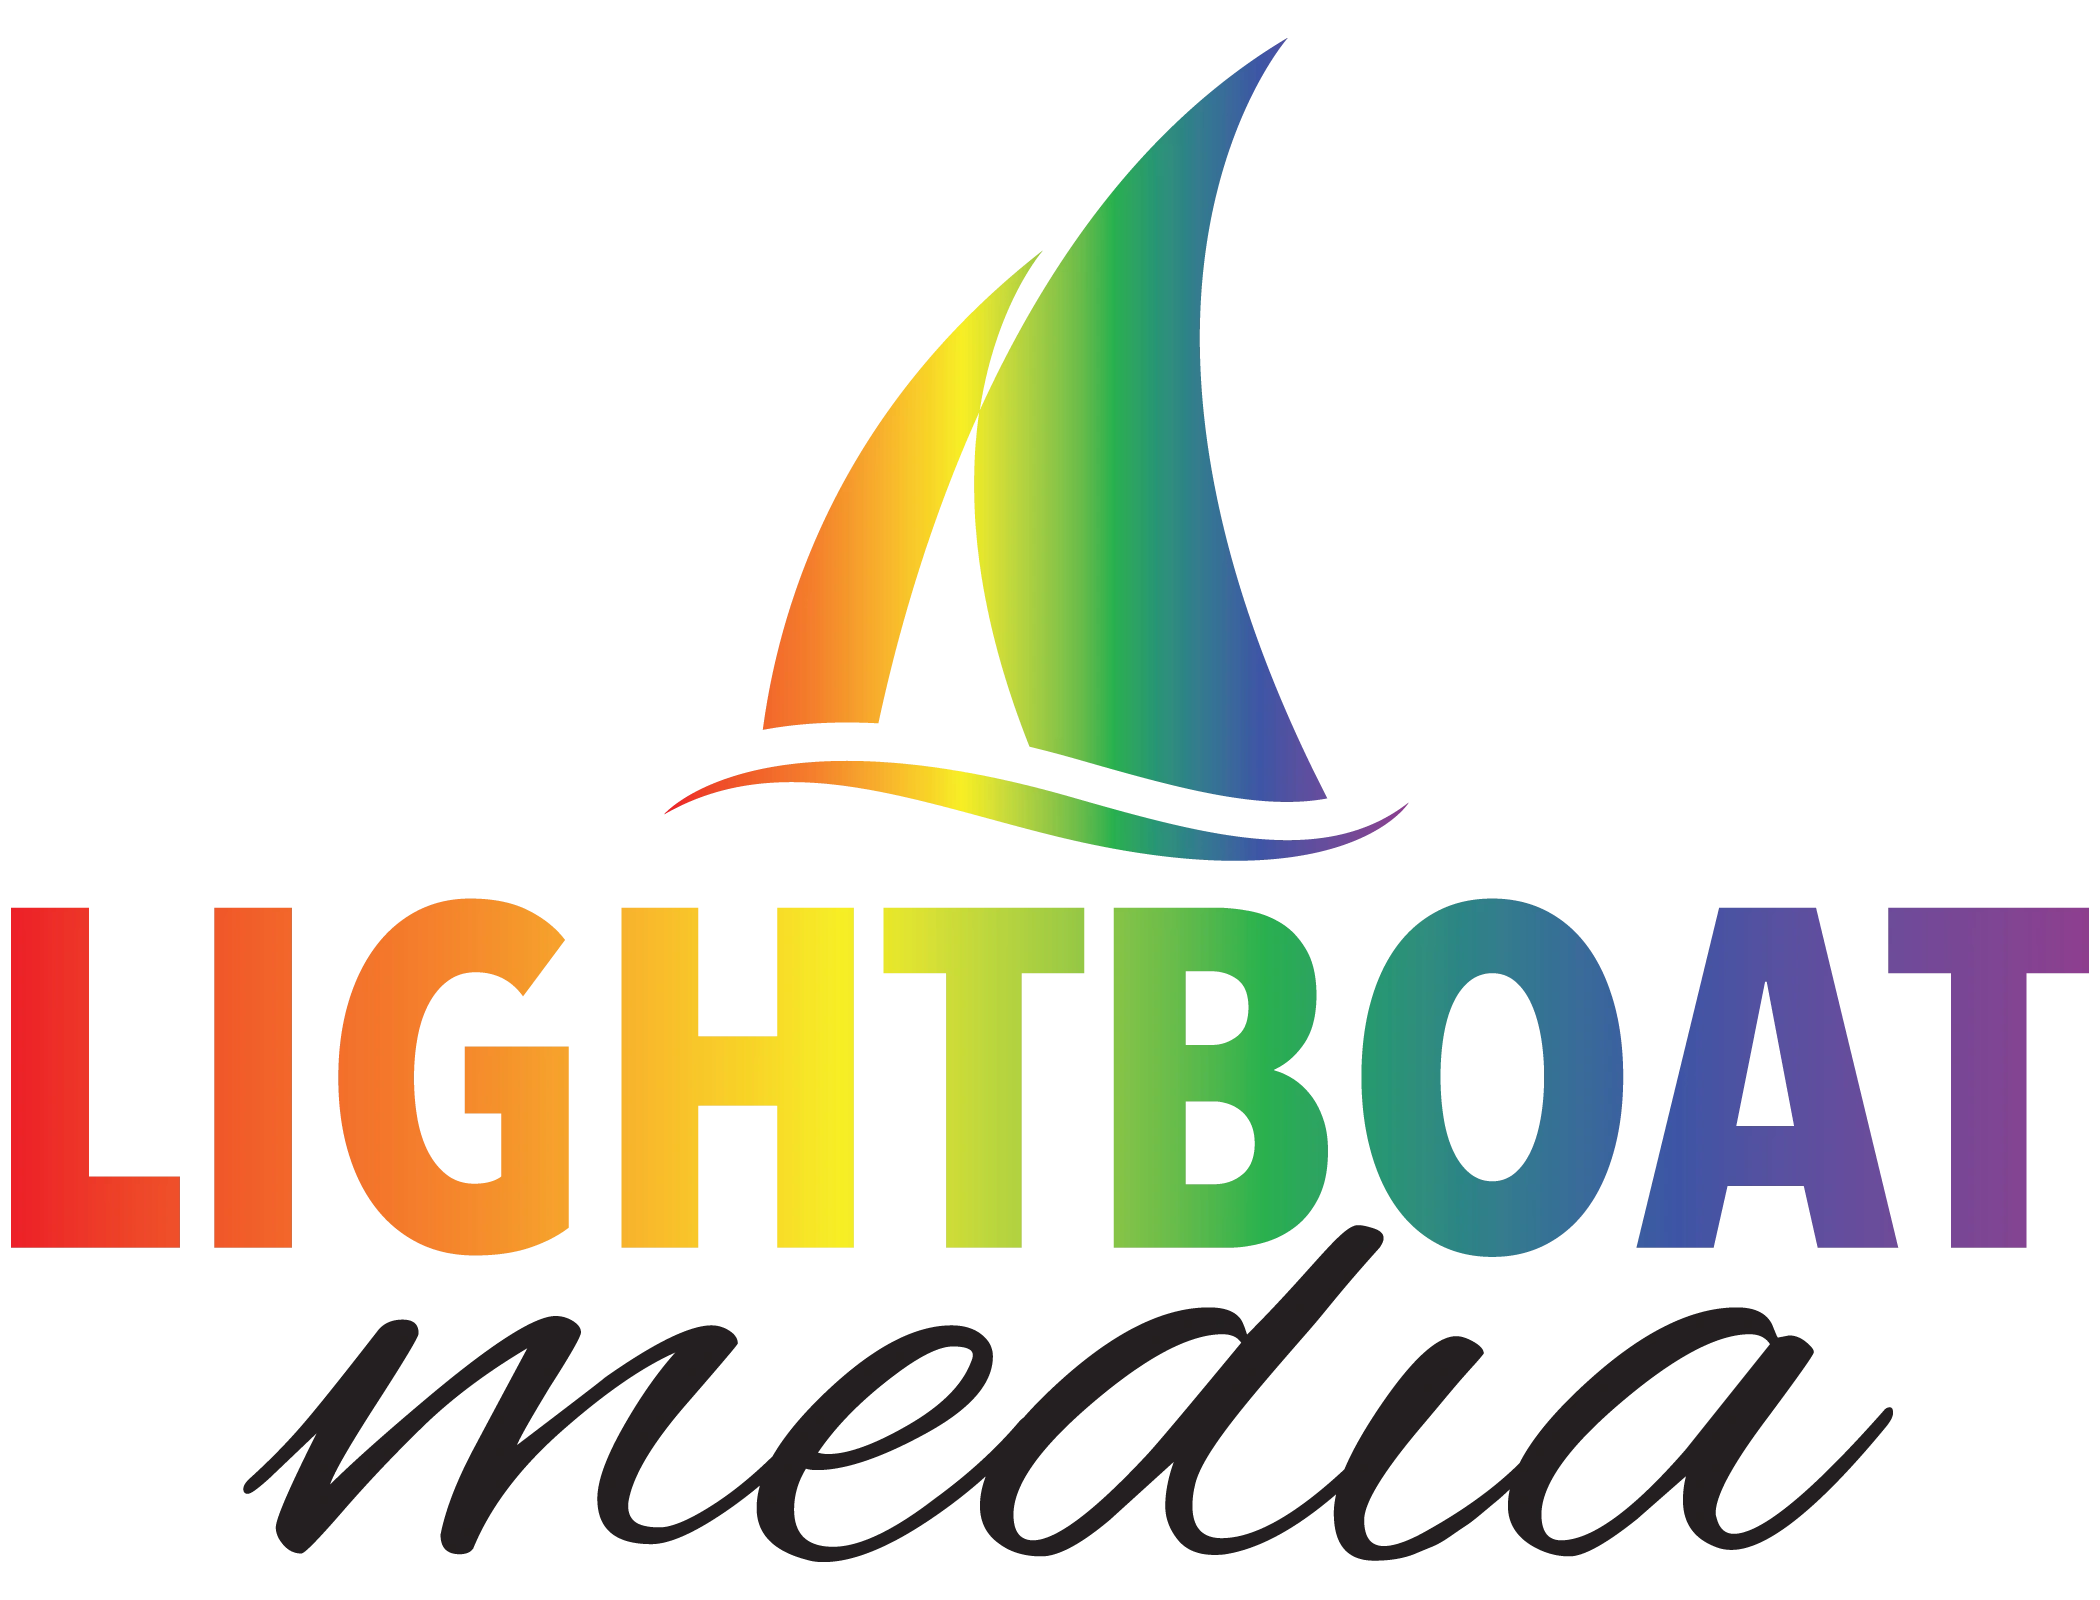 logo consisting of a sailboat over the words Lightboat Media in rainbow colors